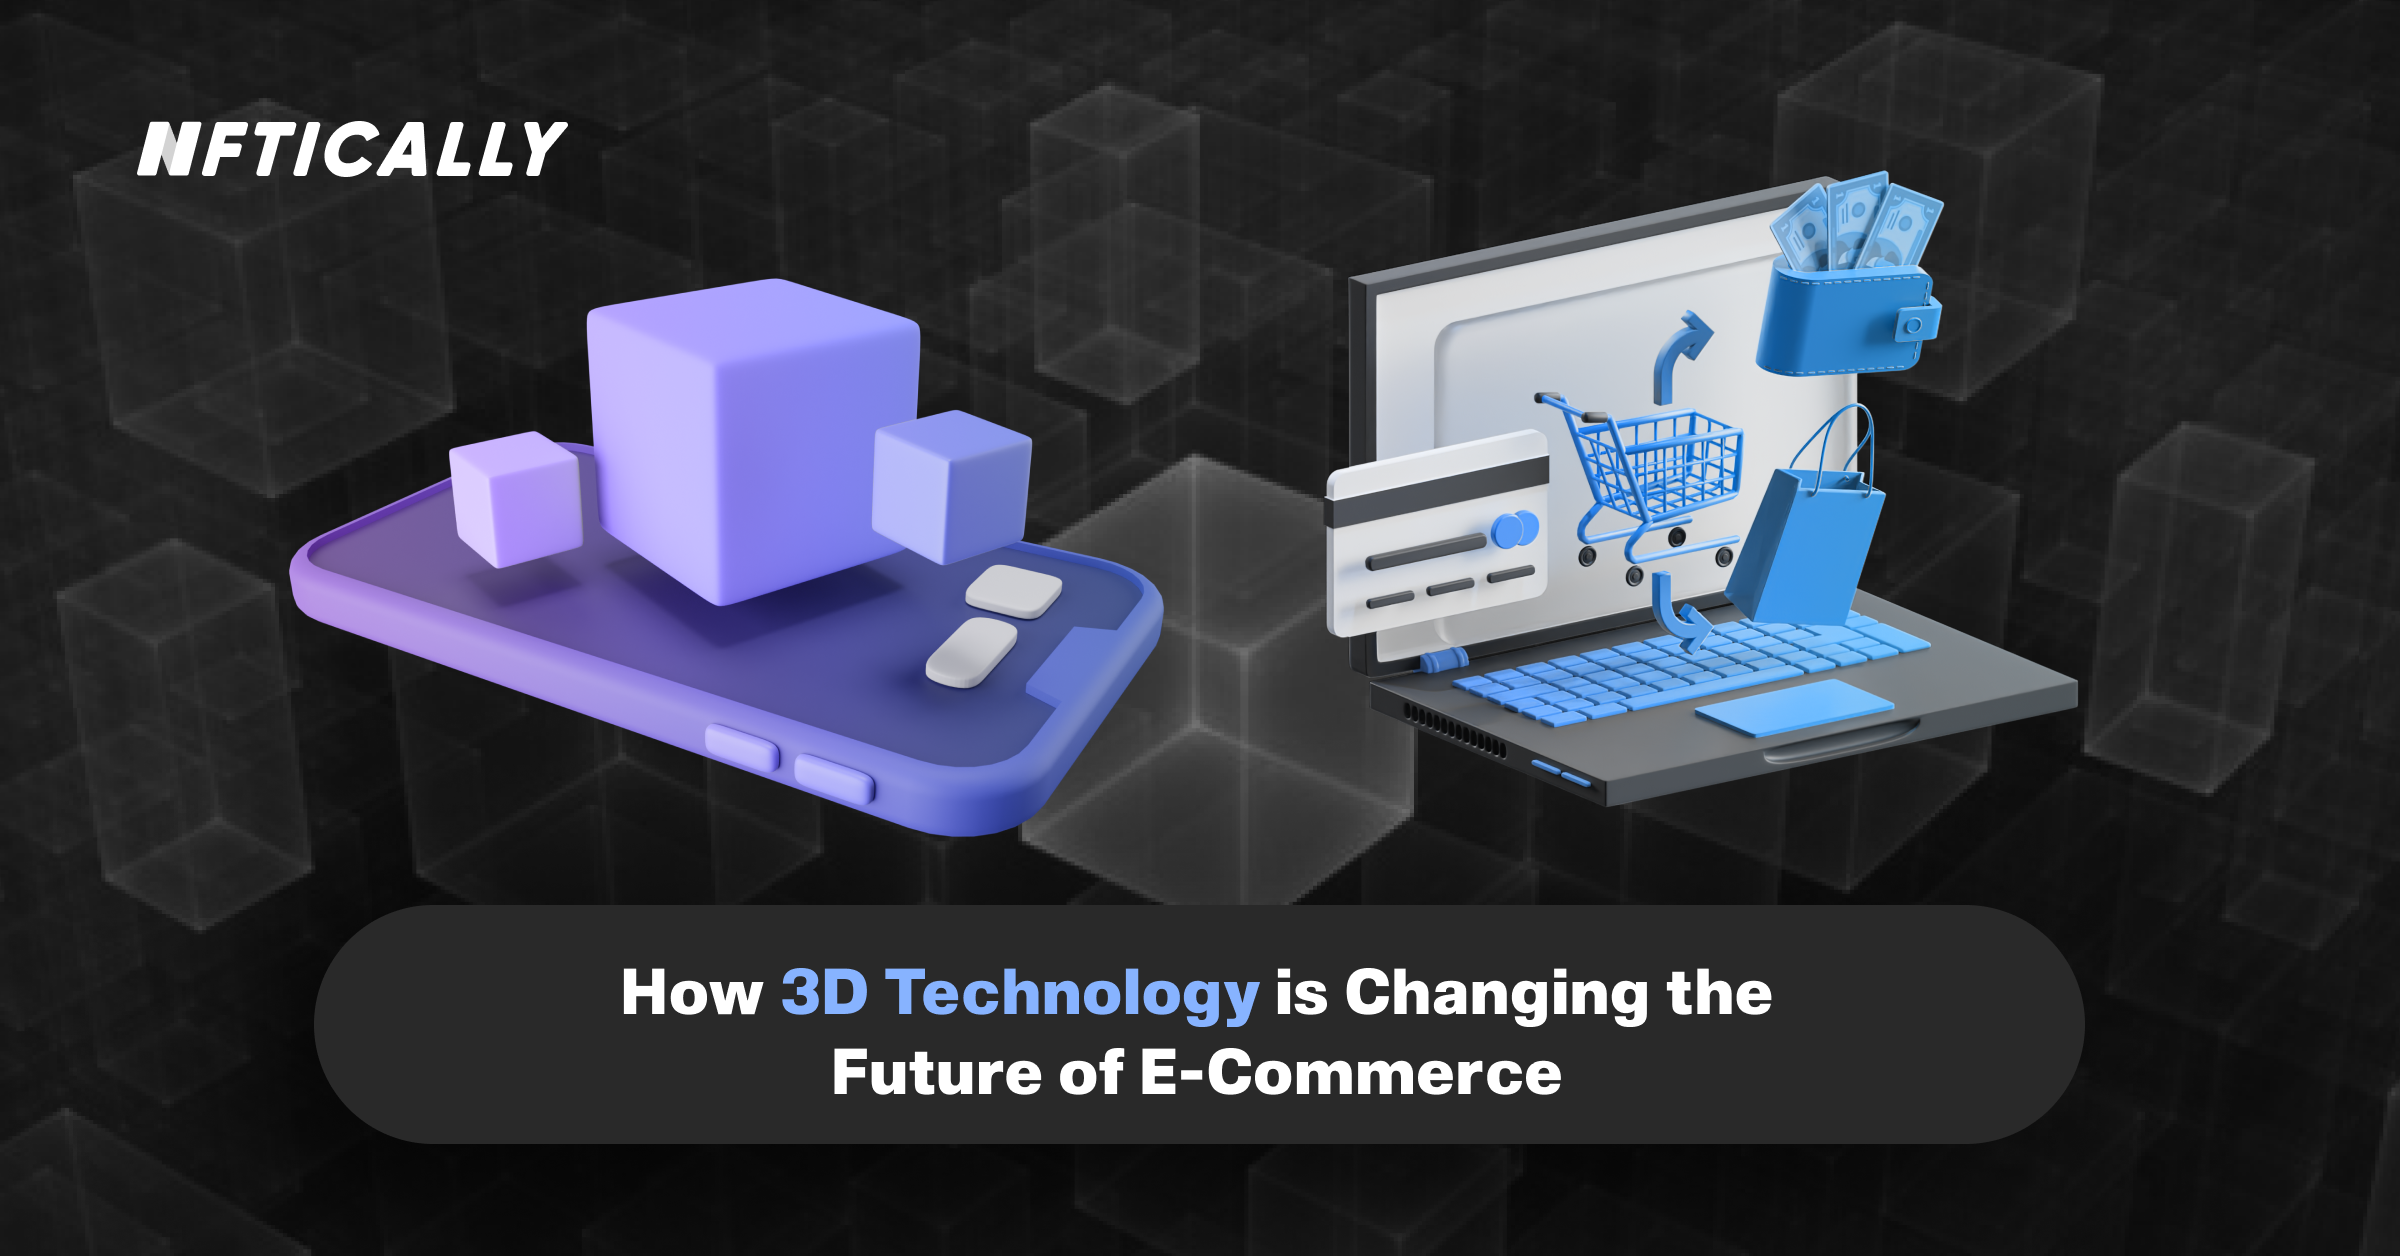 How 3D Technology is Changing the Future of E-Commerce